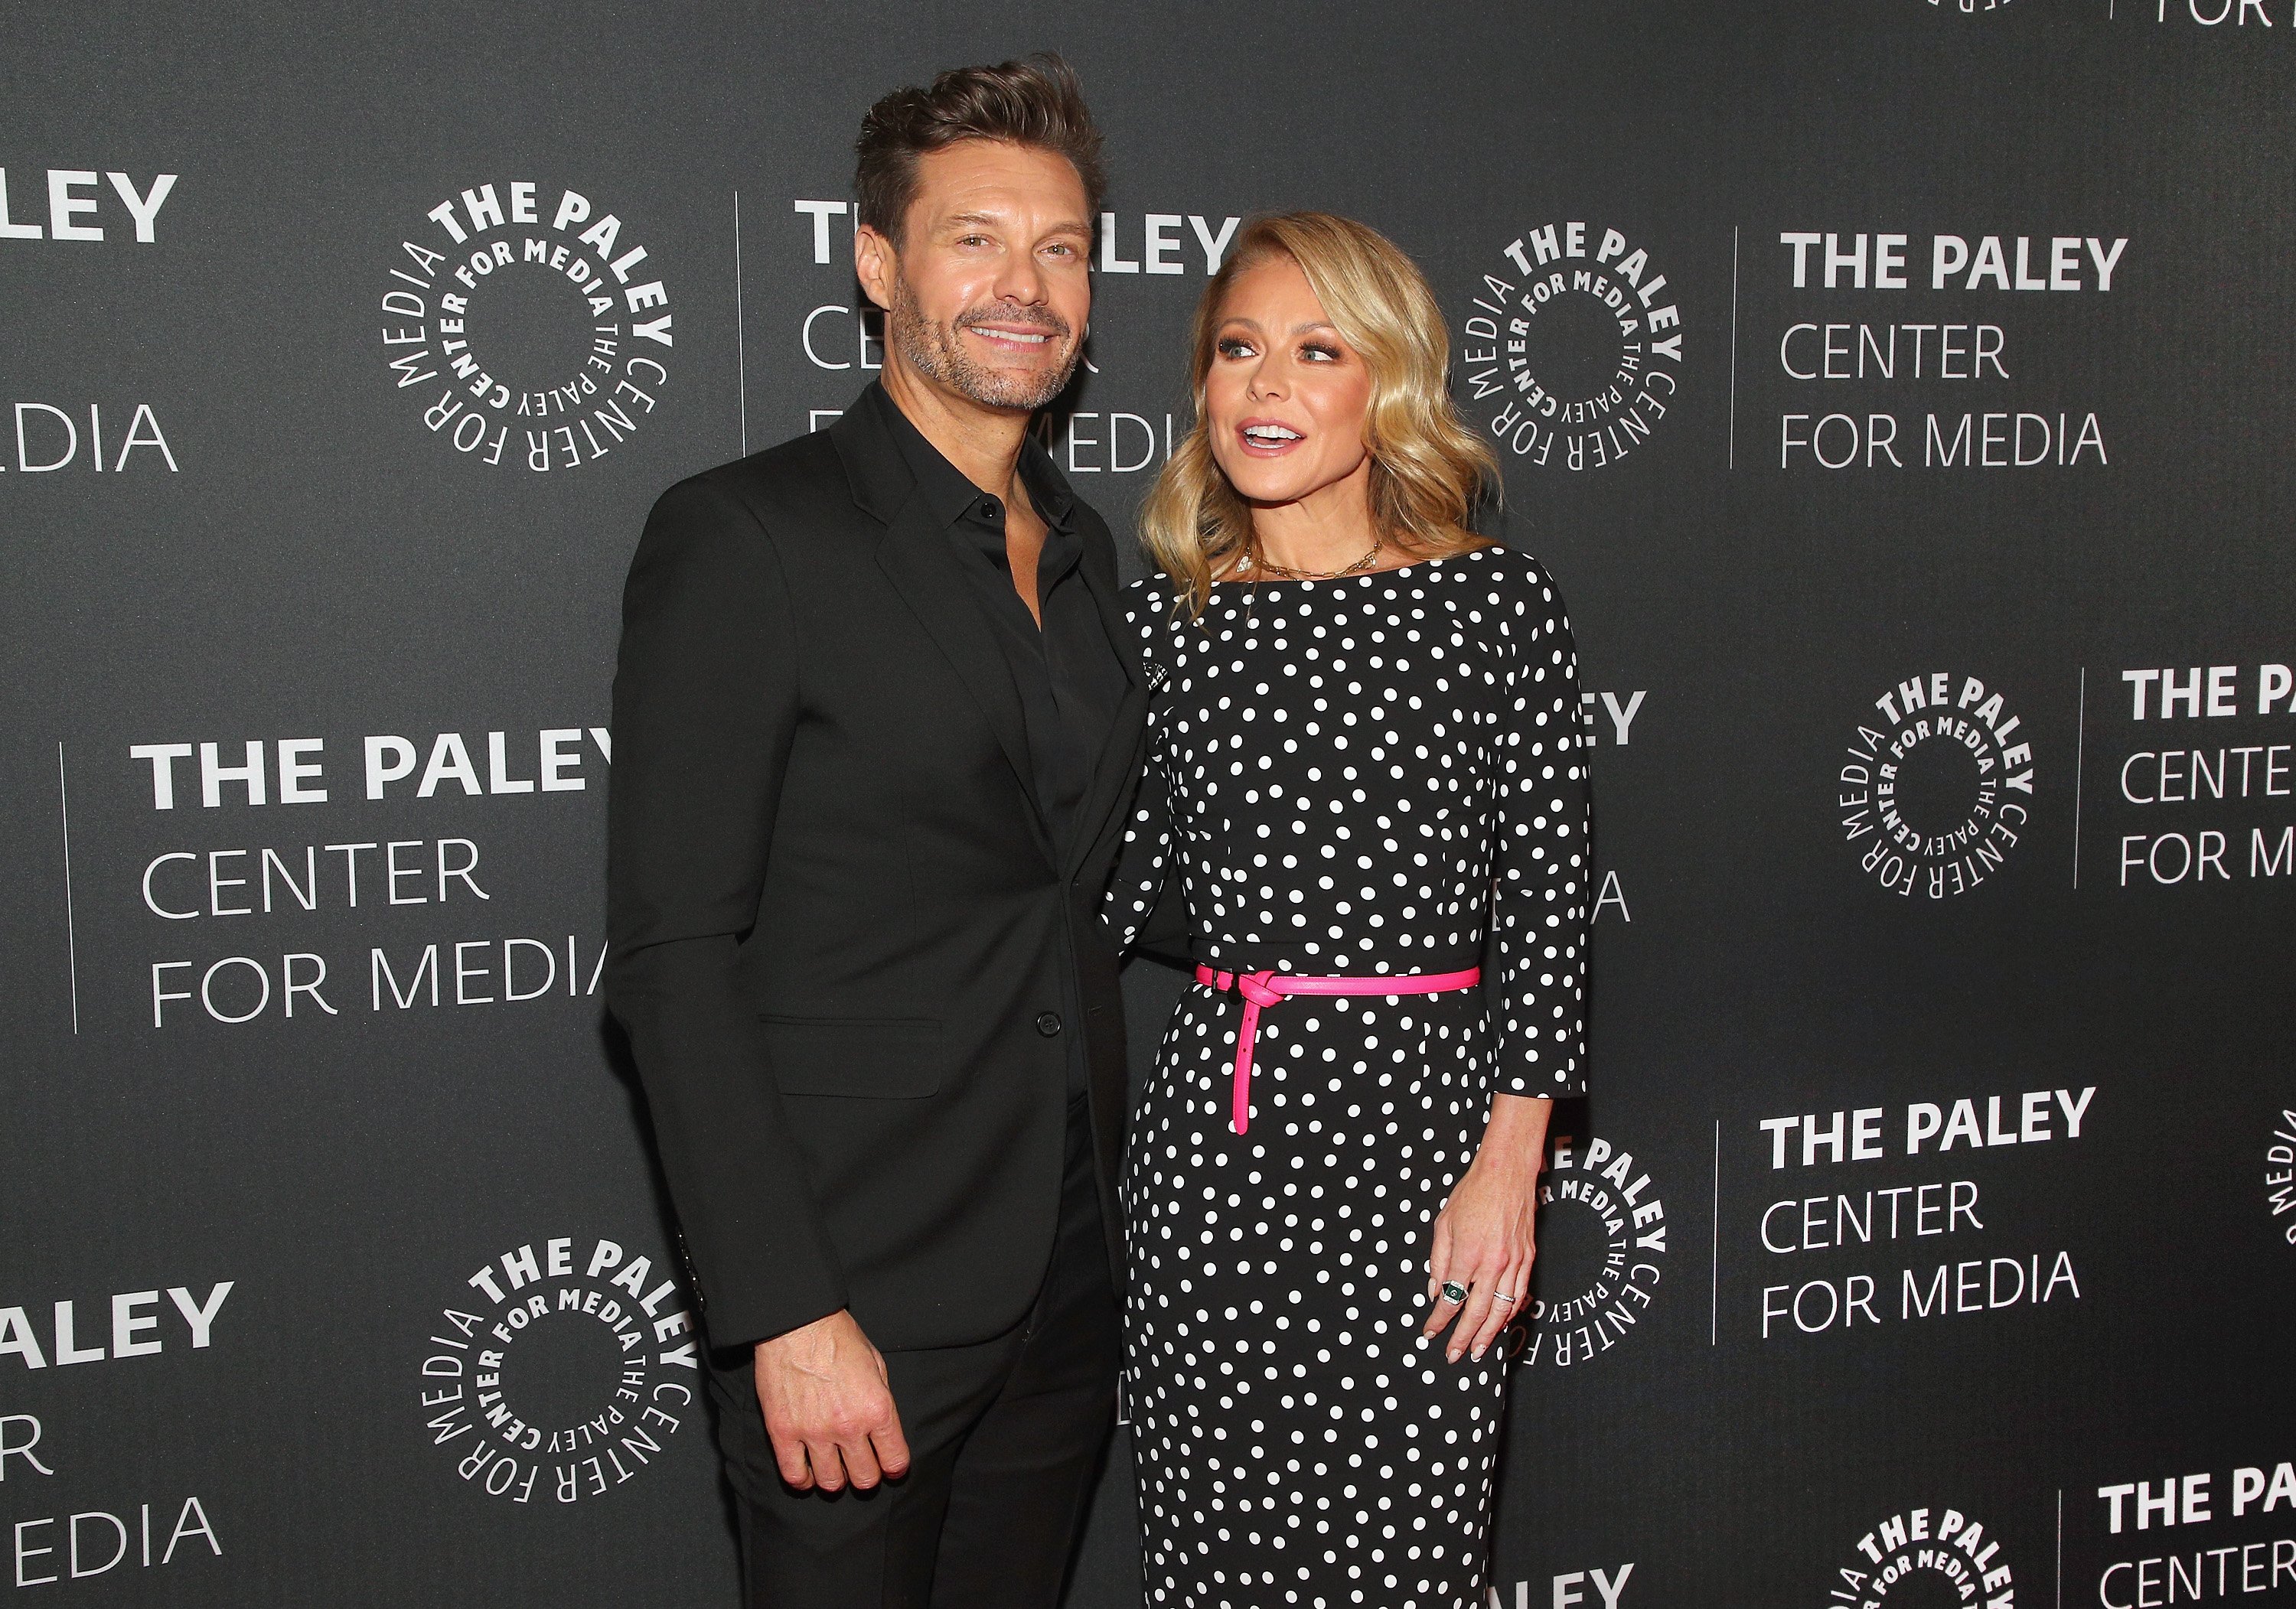 Ryan Seacrest and Kelly Ripa attend The Paley Center For Media Presents: An Evening with "Live with Kelly and Ryan" on March 04, 2020, in New York City. | Source: Getty Images.